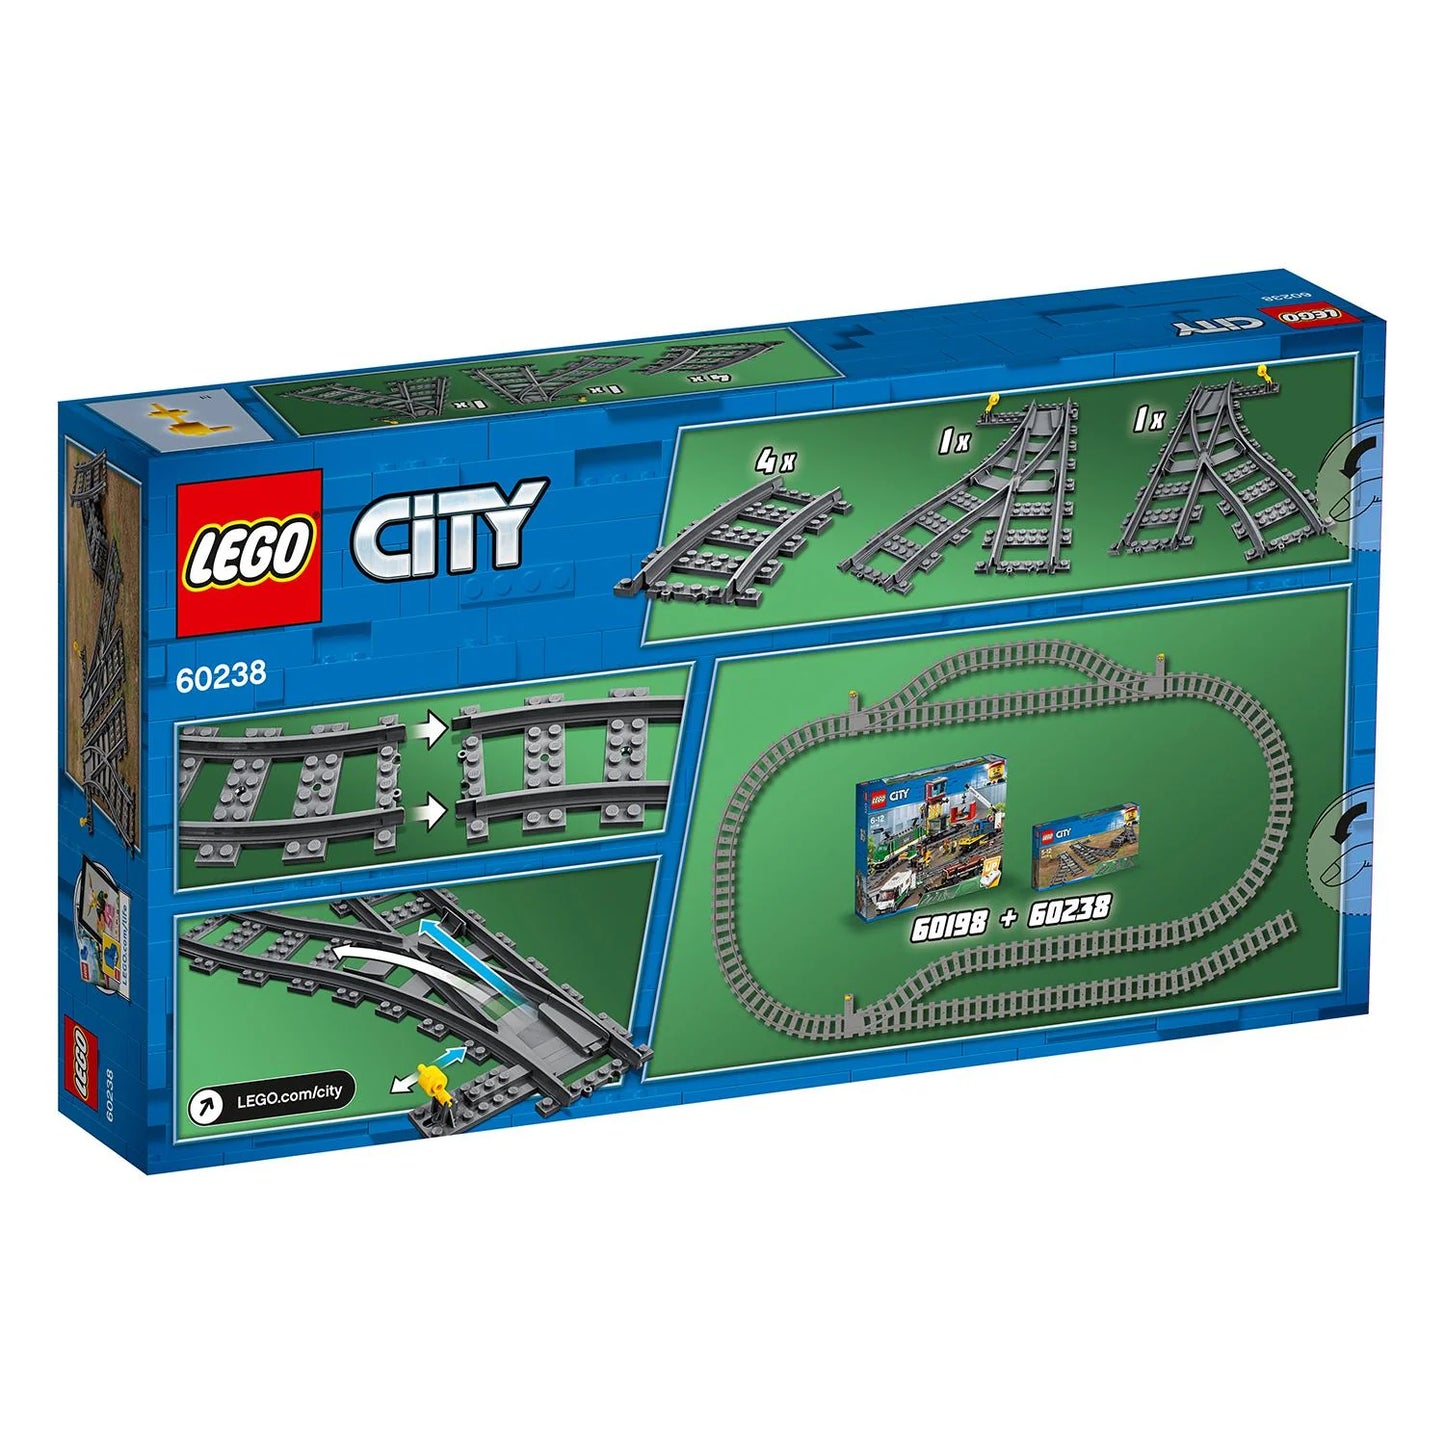 Substitutes (new for 7895) - LEGO City